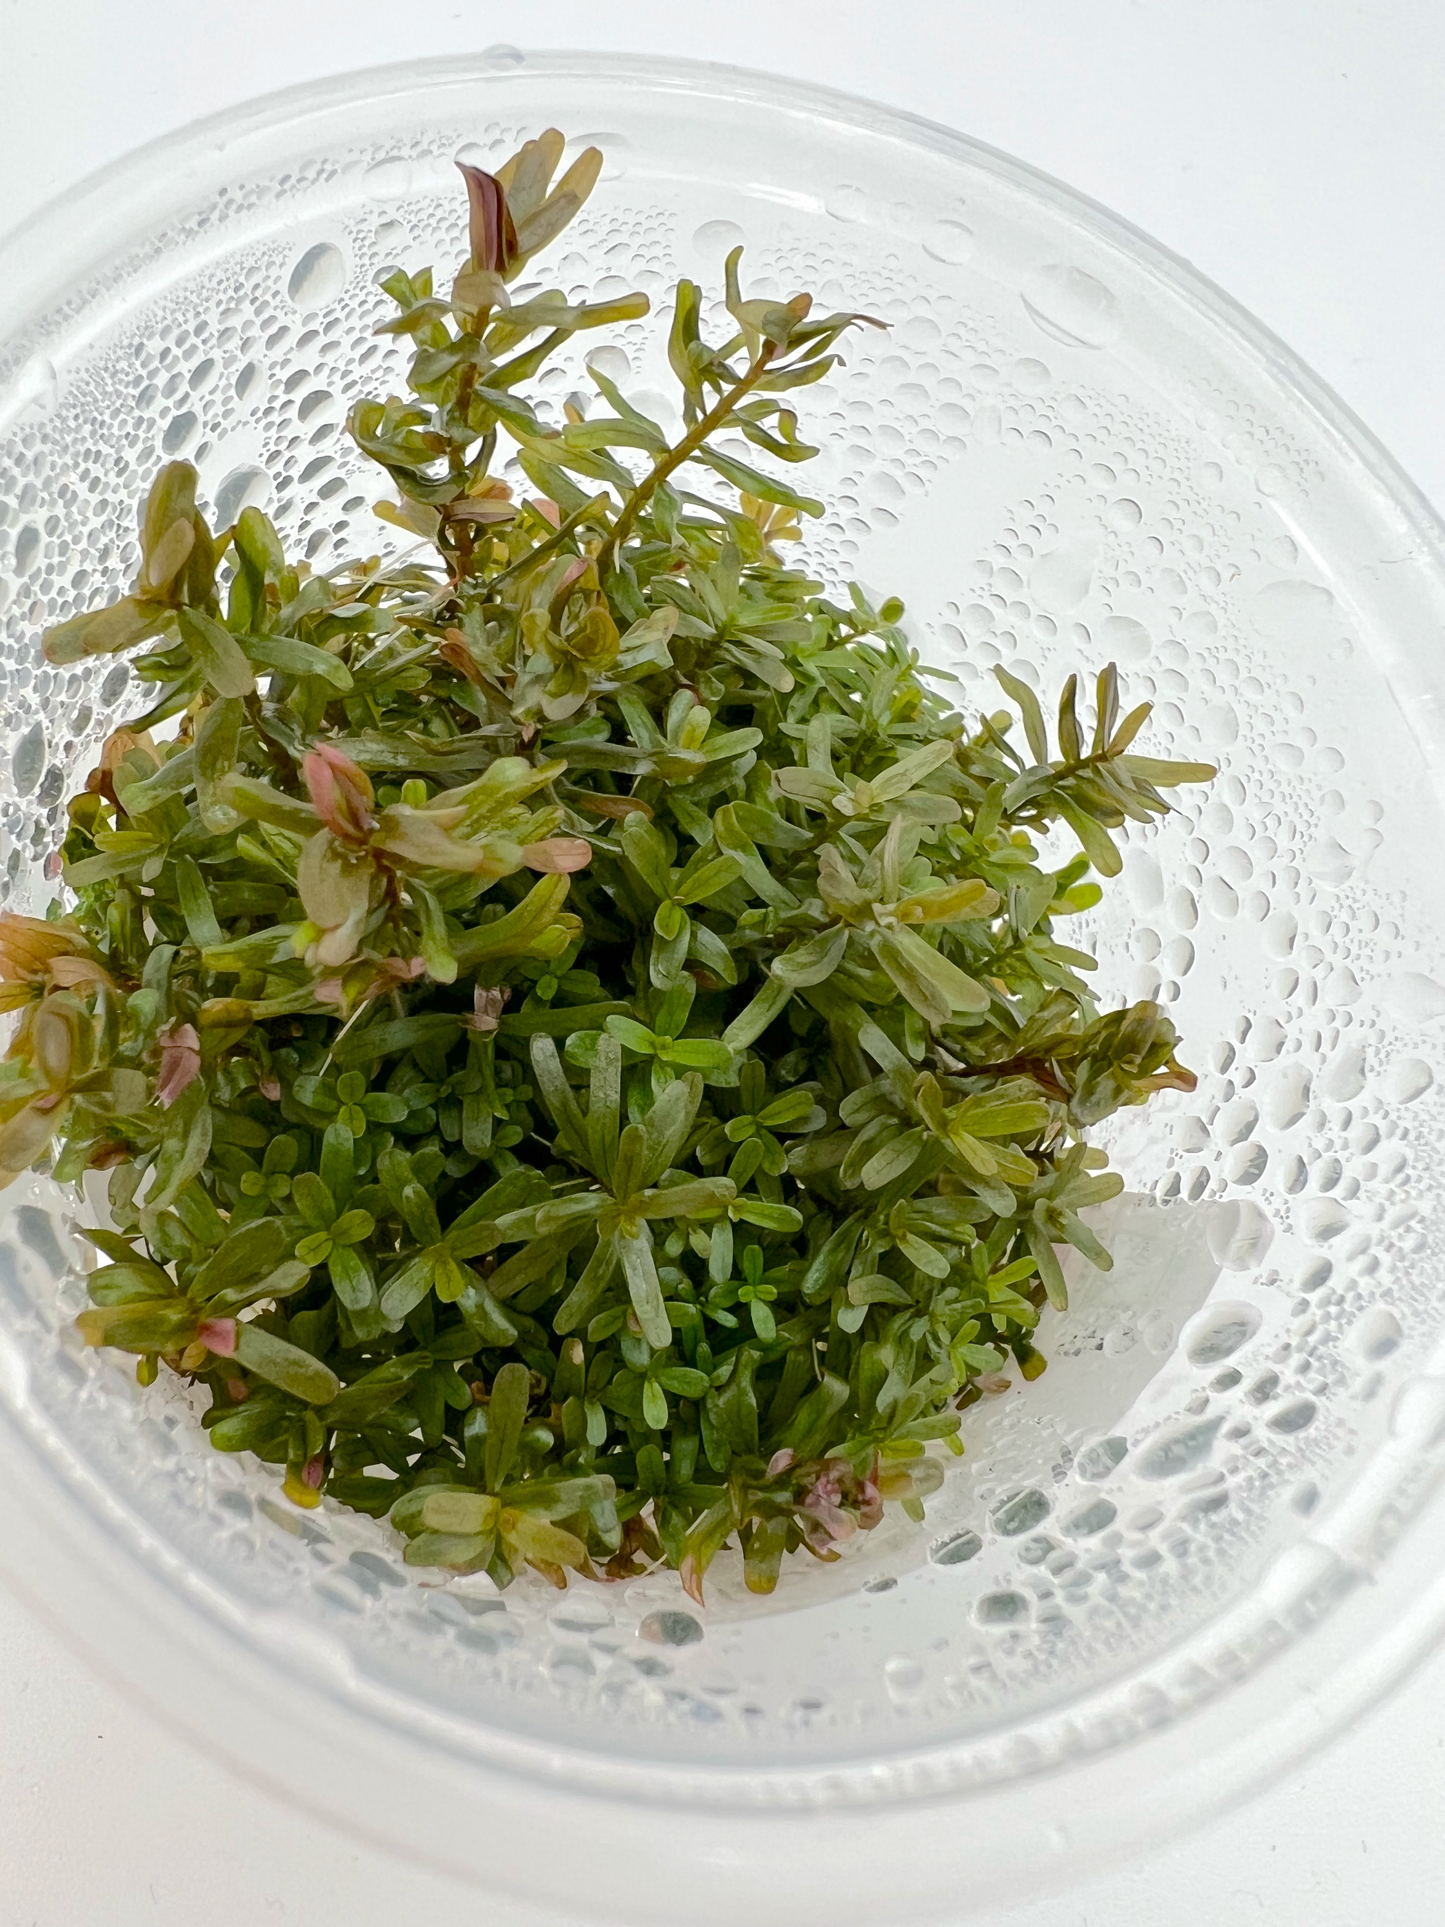 Rotala sp. ‘Hra’ 3" cup